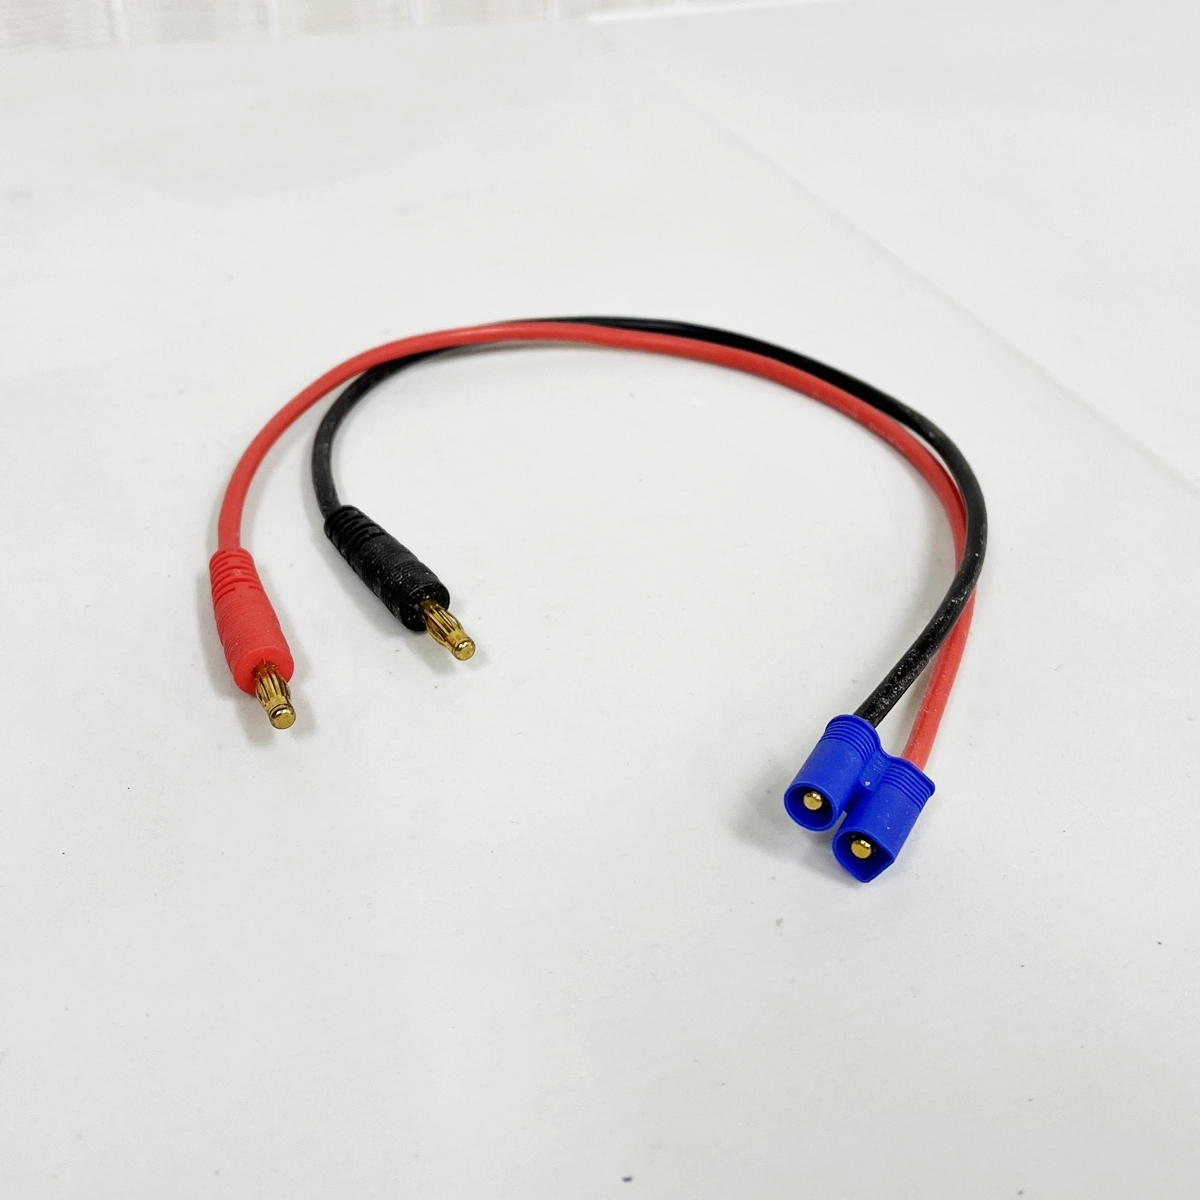 EC3 / IC3 battery charge cable connector coupler (4mm banana ) RC lock crawler off-road radio-controller buggy race * postage included 